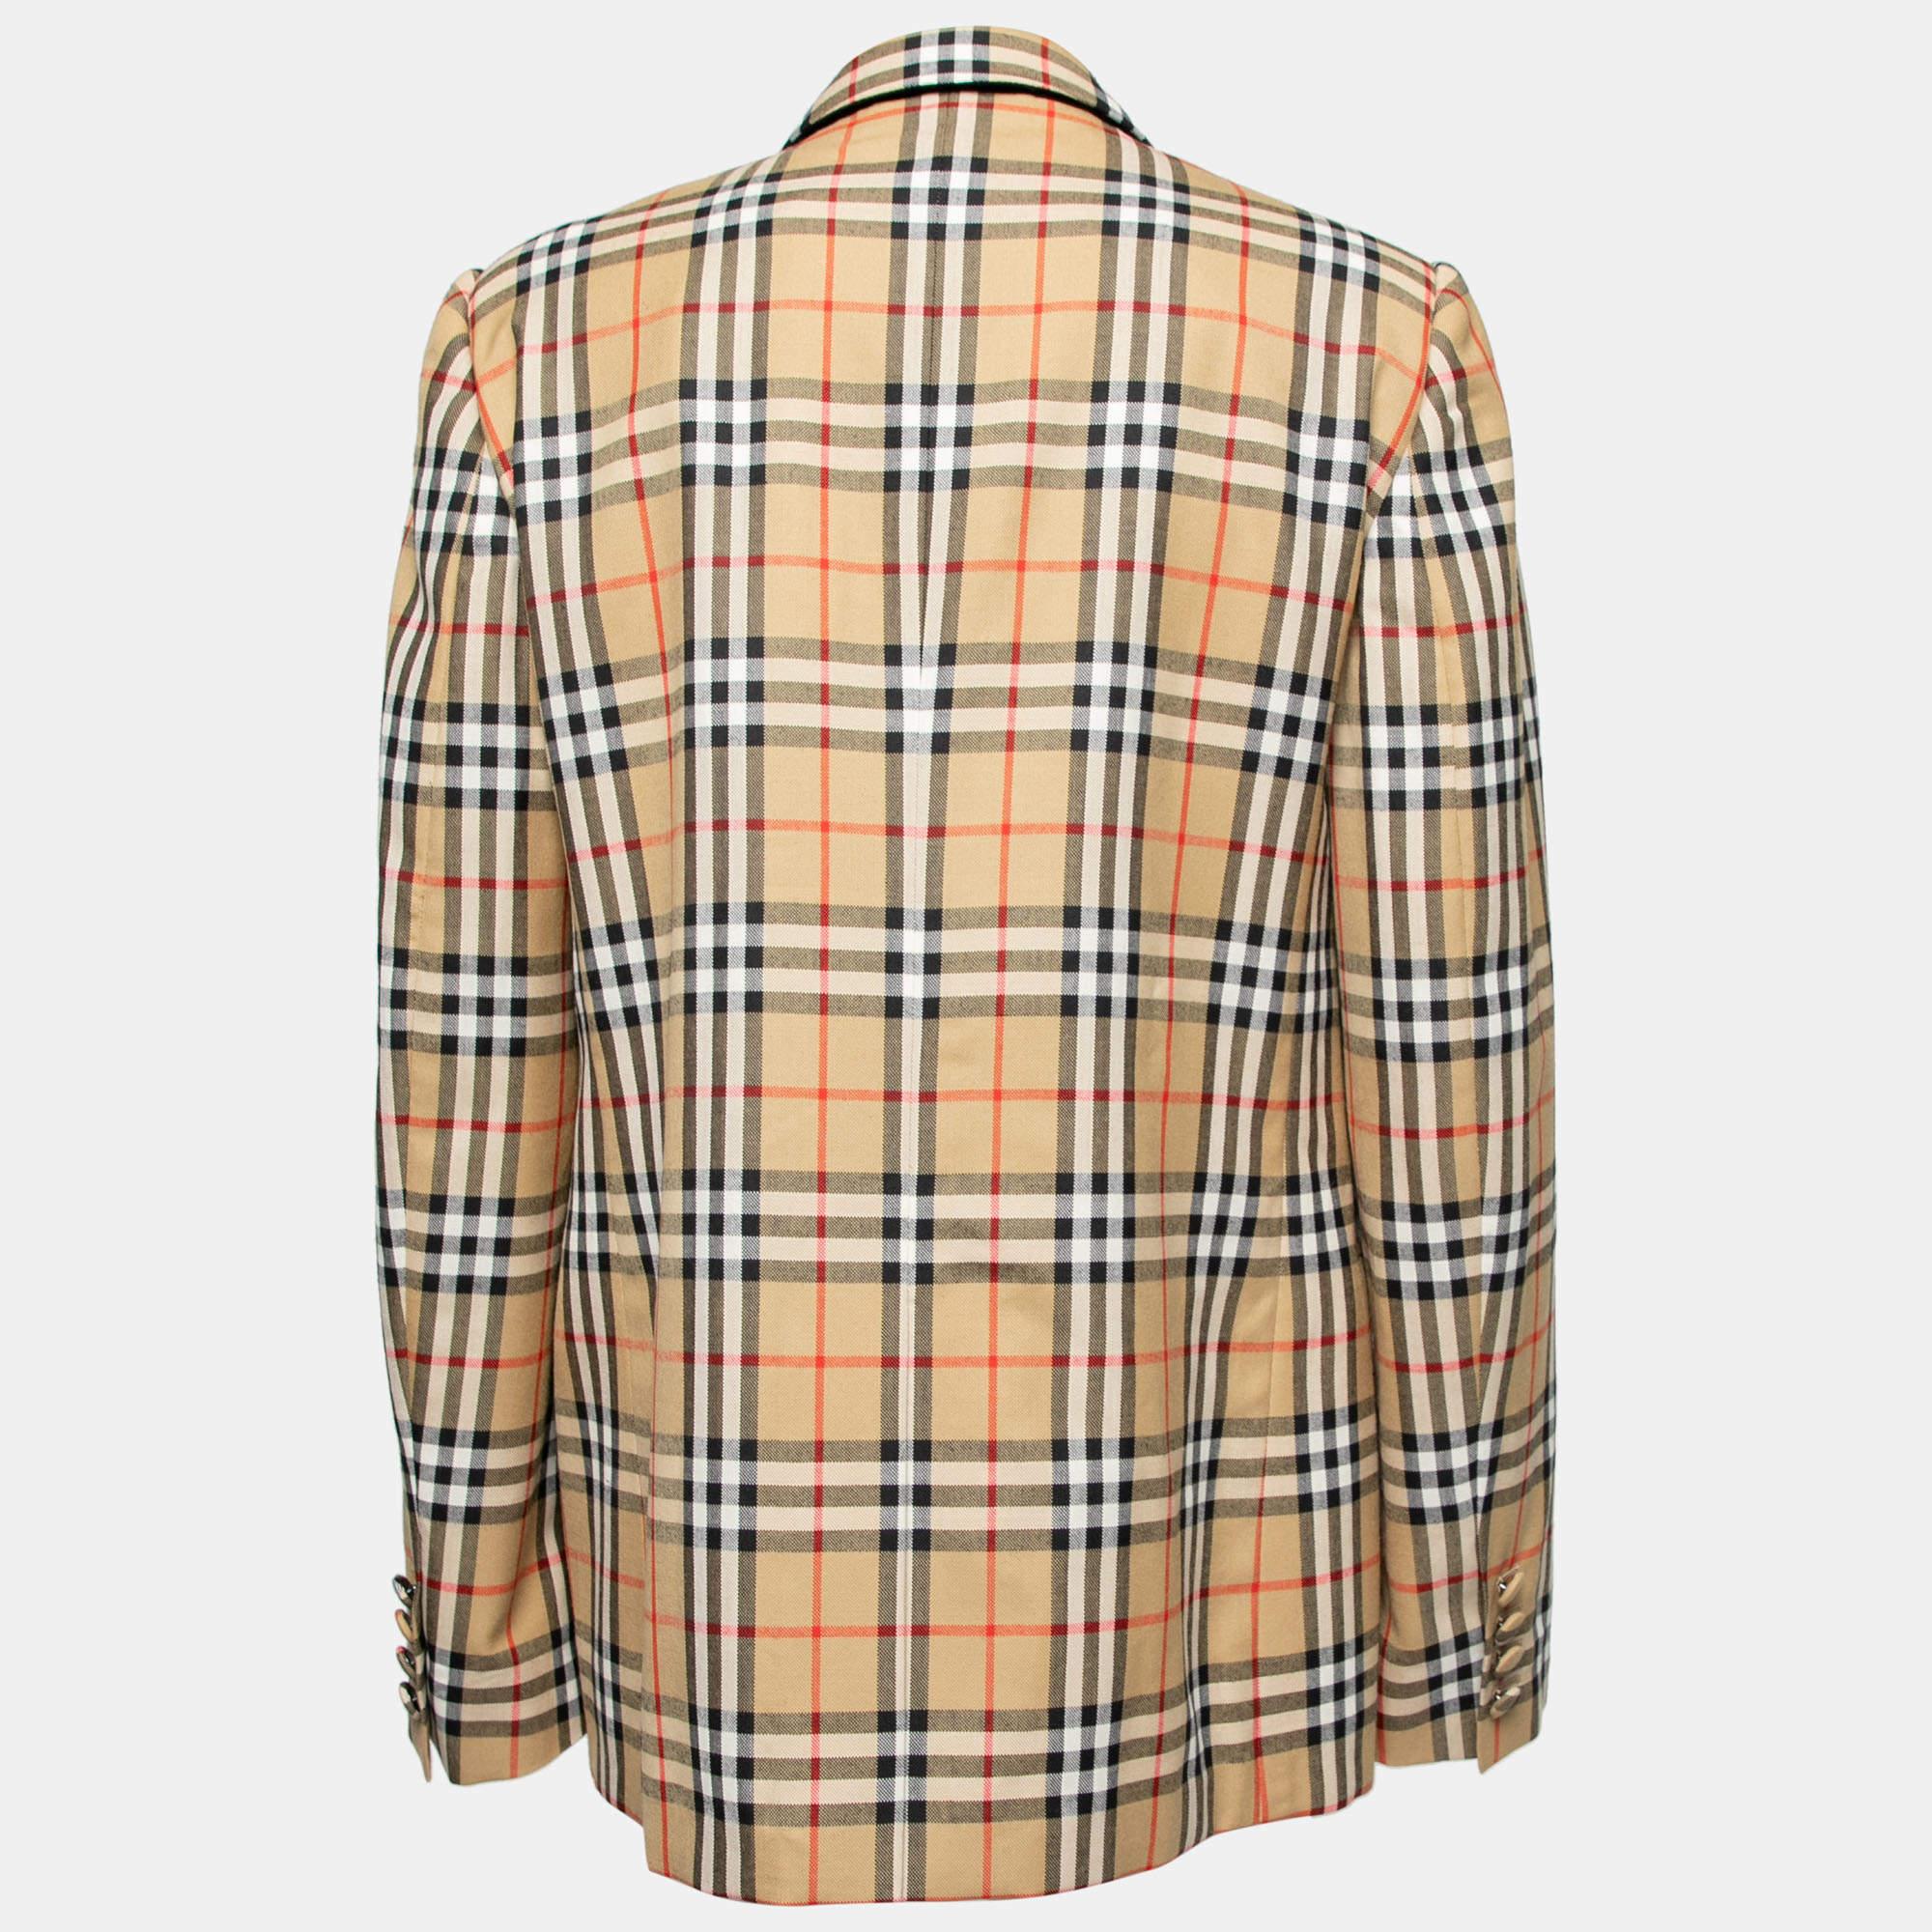 Sport a polished and suave look as you wear this smart blazer from the House of Burberry. It is cut from beige Vintage Check wool into a single-breasted silhouette. It displays buttoned closures, three pockets, and long sleeves. Pair this blazer